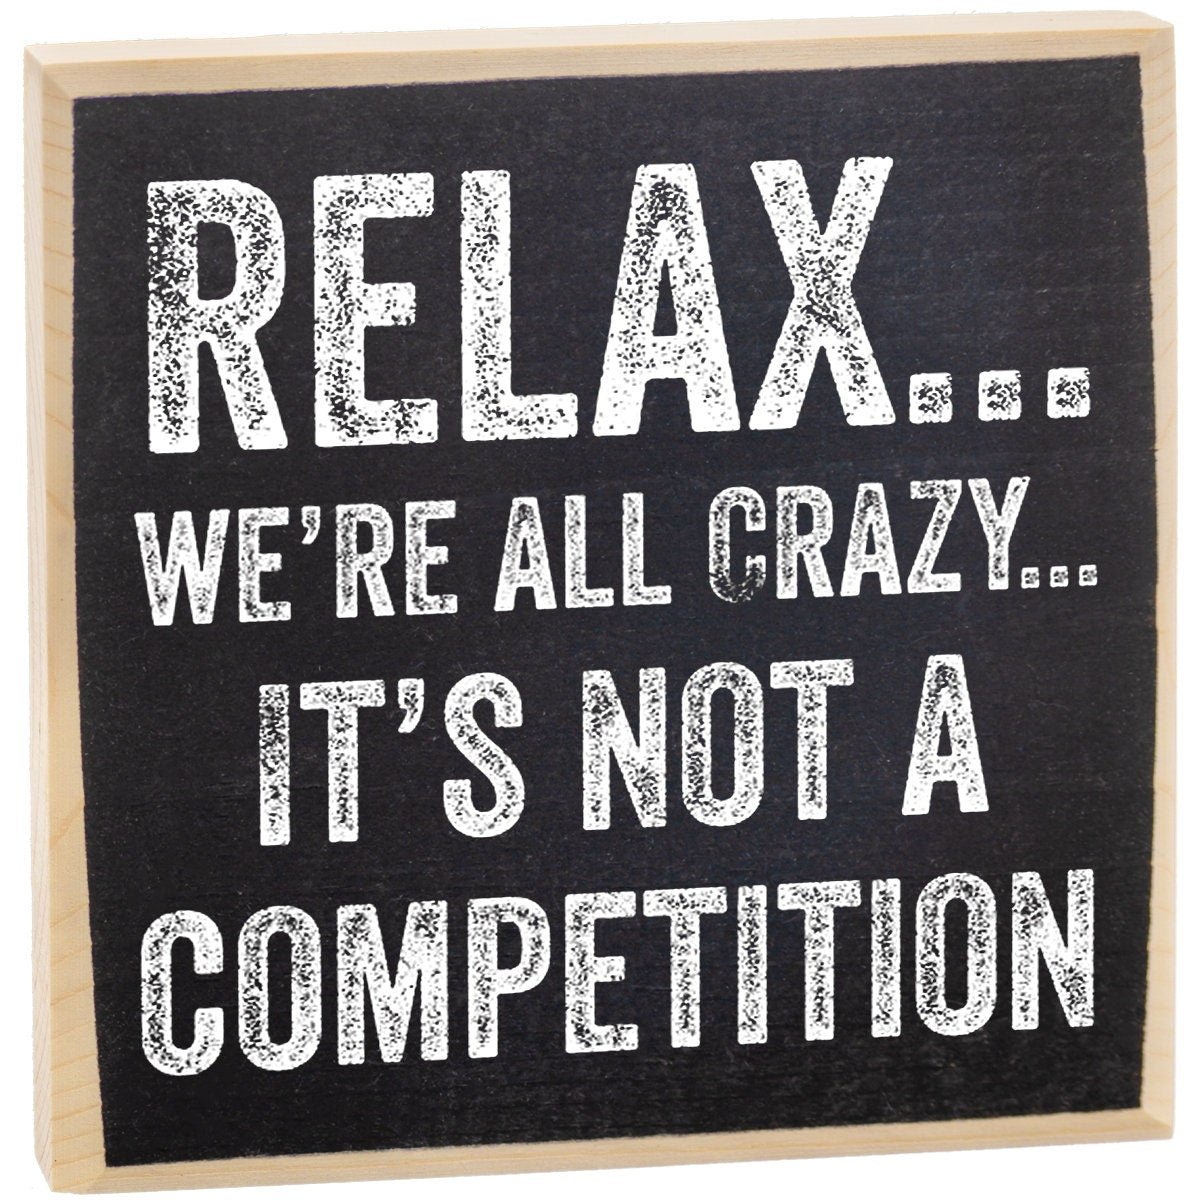 Rustic Wooden Sign - Relax We're All Crazy - Makes a Great Gift and Decor Lone Star Art 